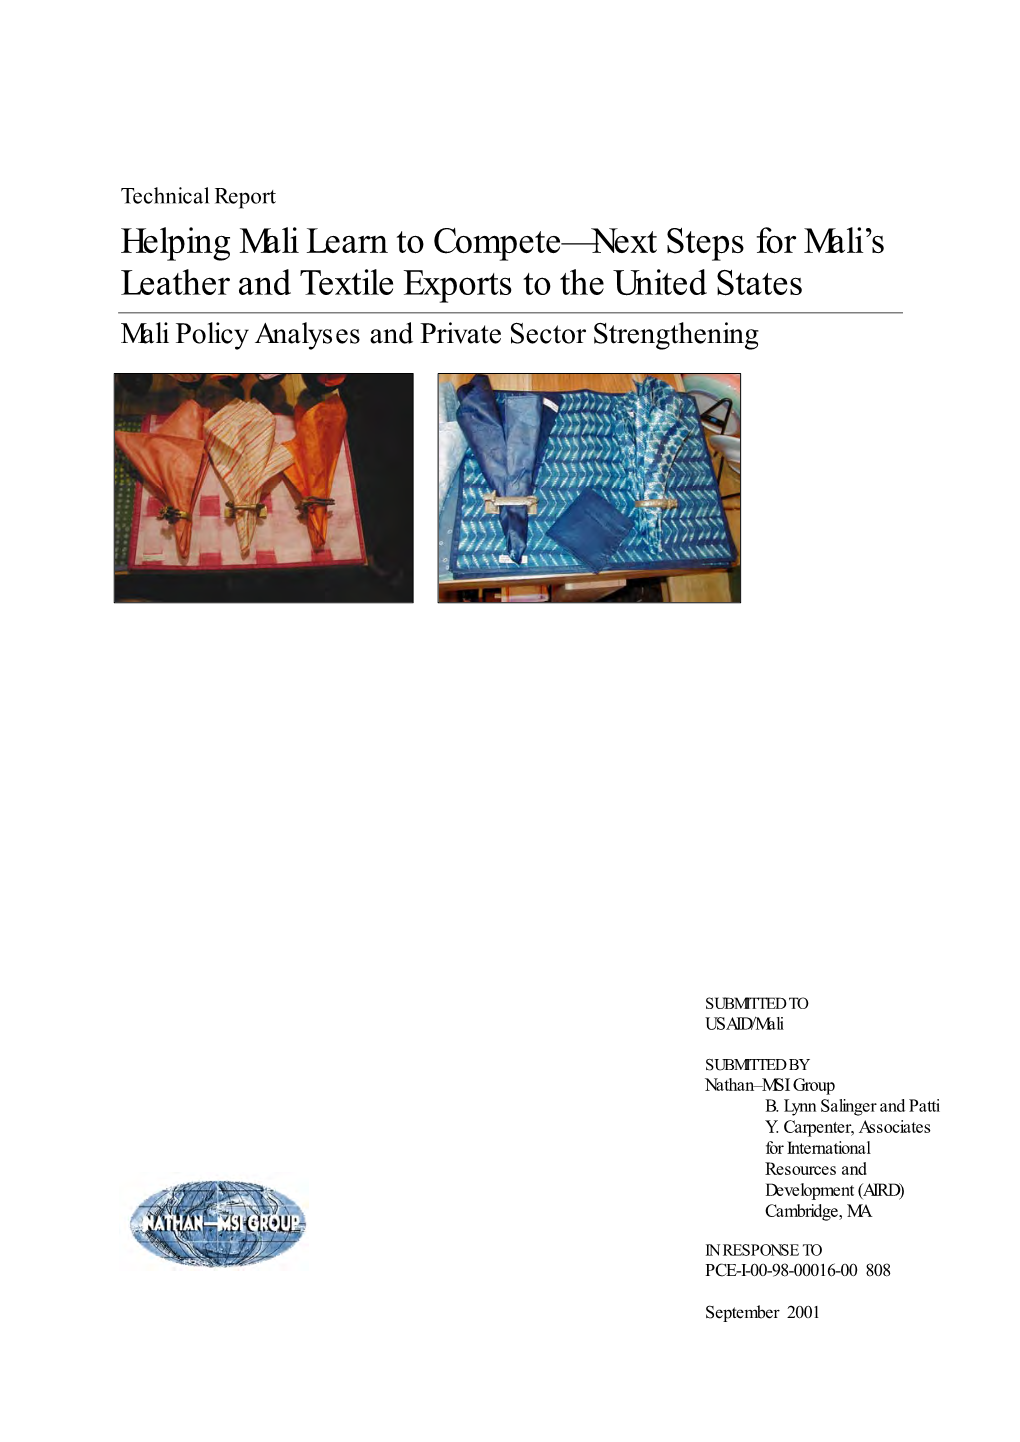 Helping Mali Learn to Compete—Next Steps for Mali's Leather And